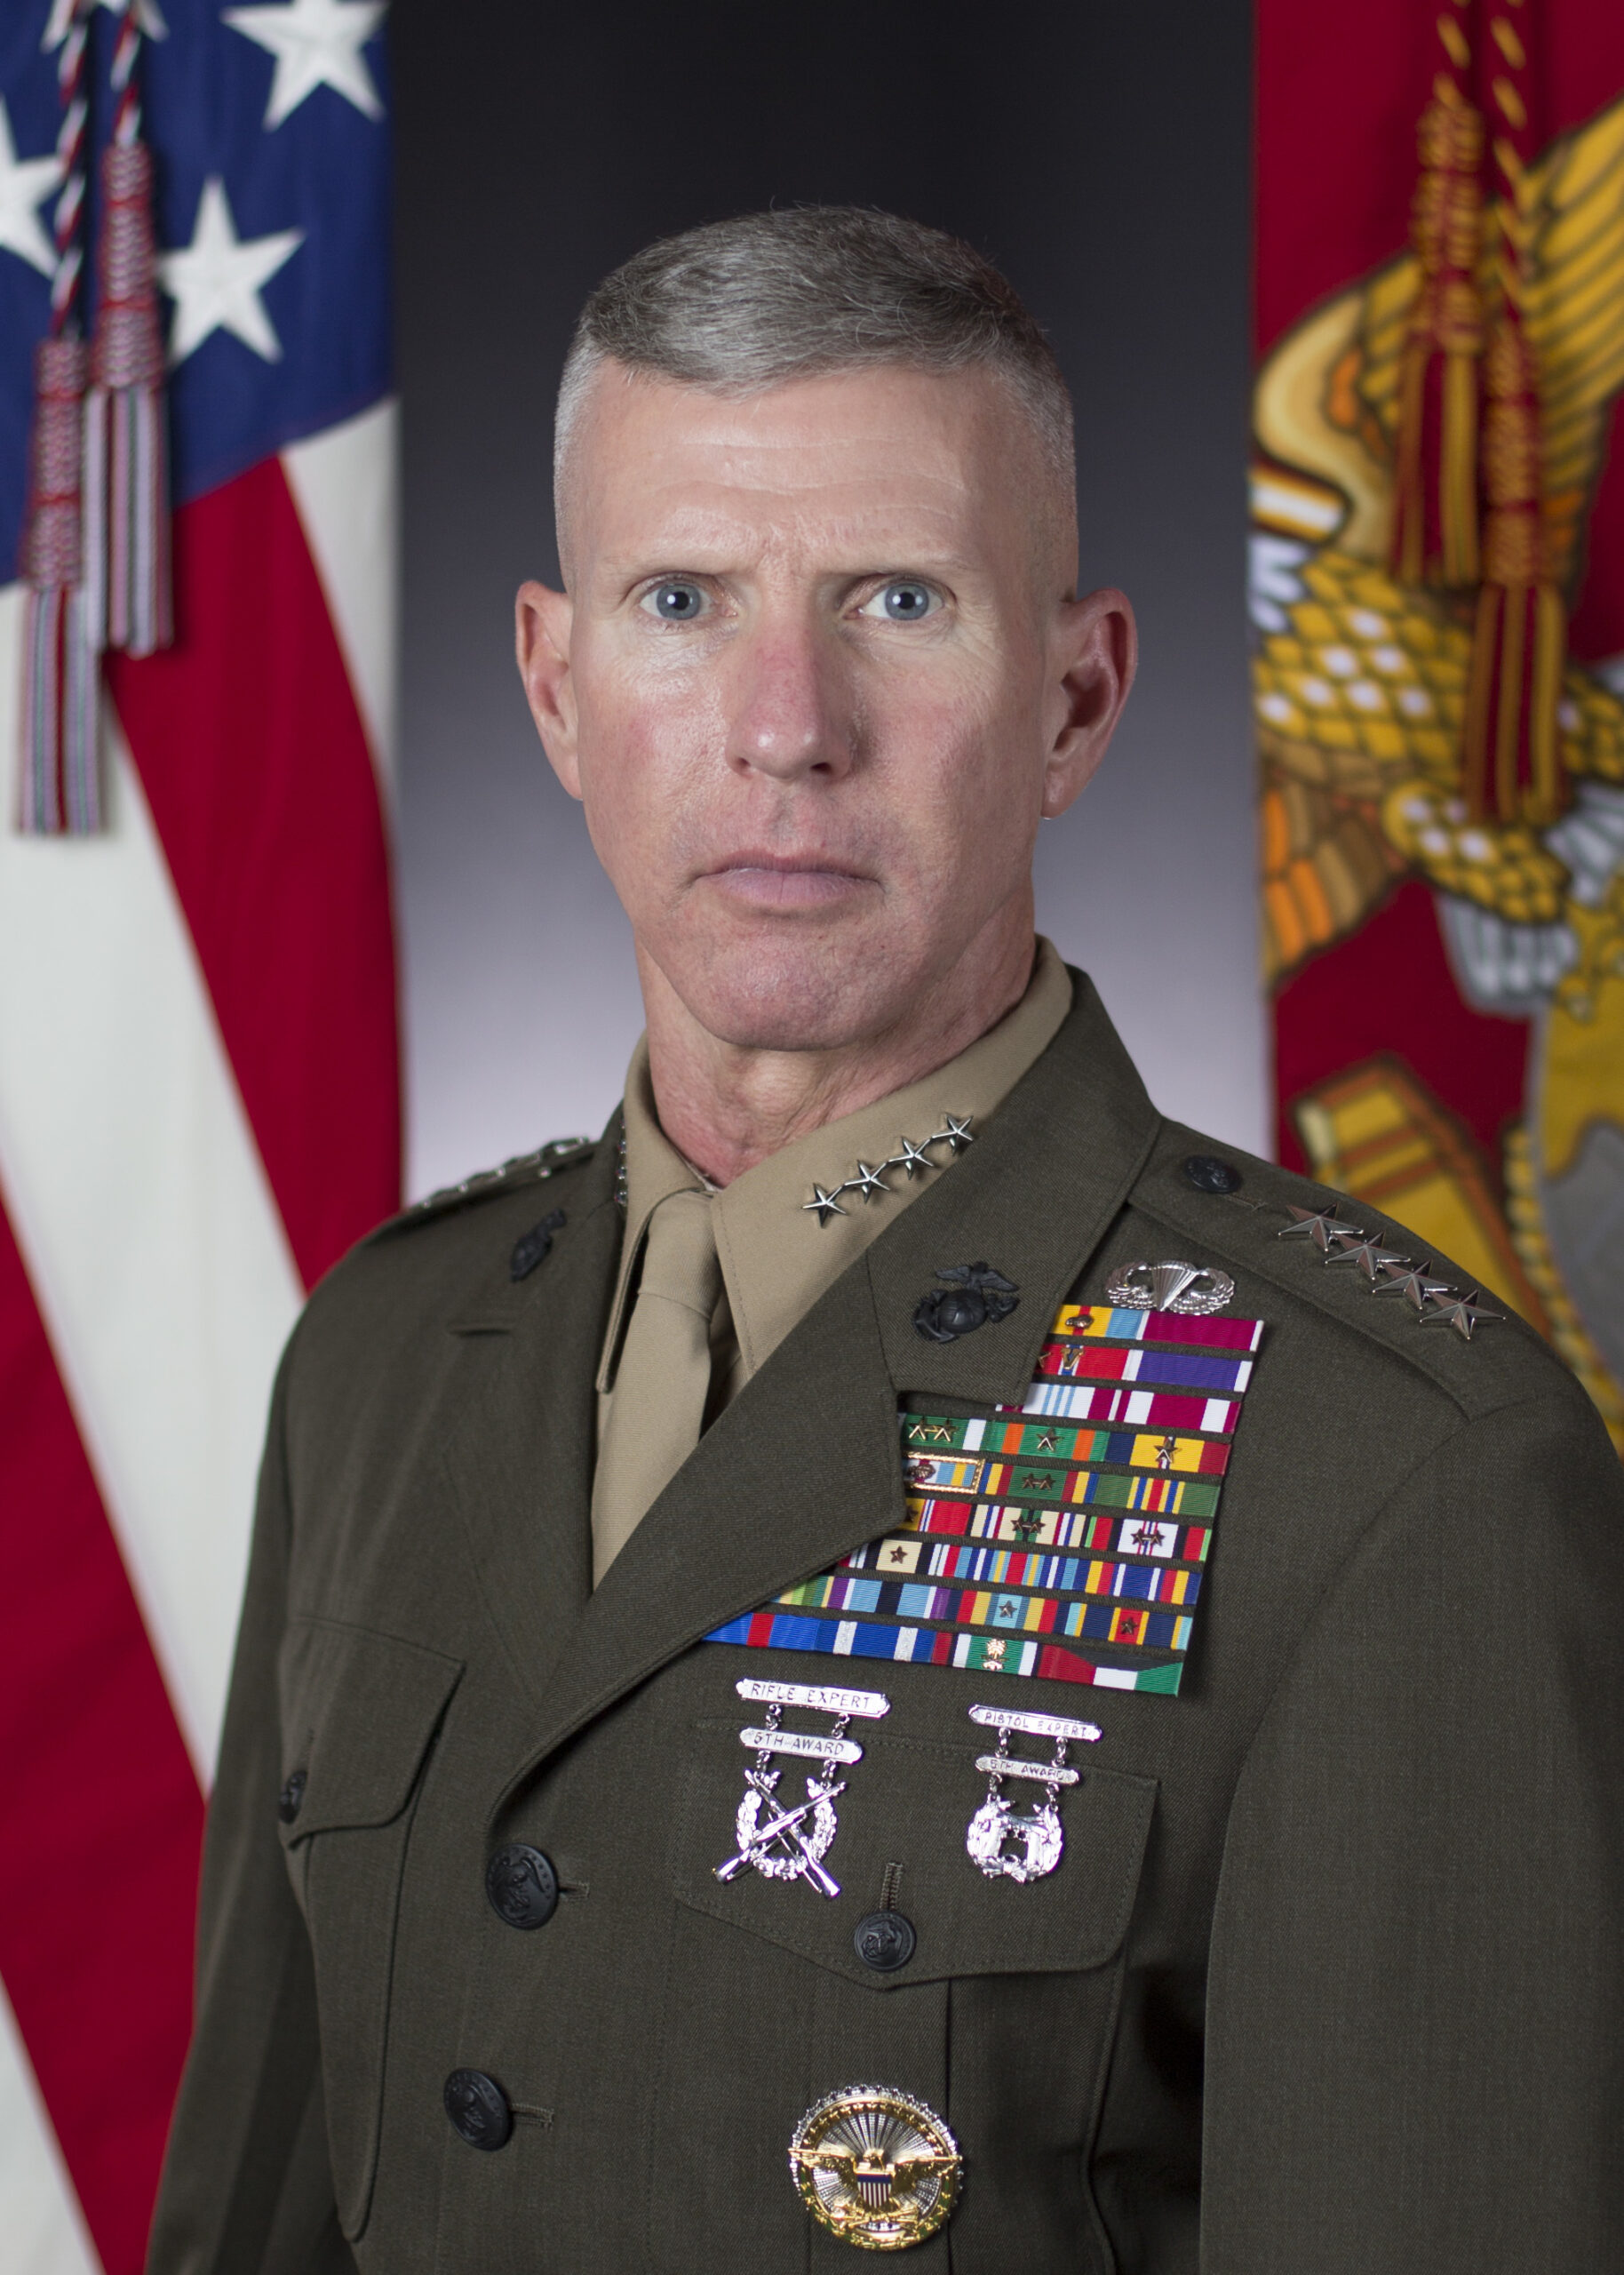 General Eric M. Smith, Commandant of the Marine Corps